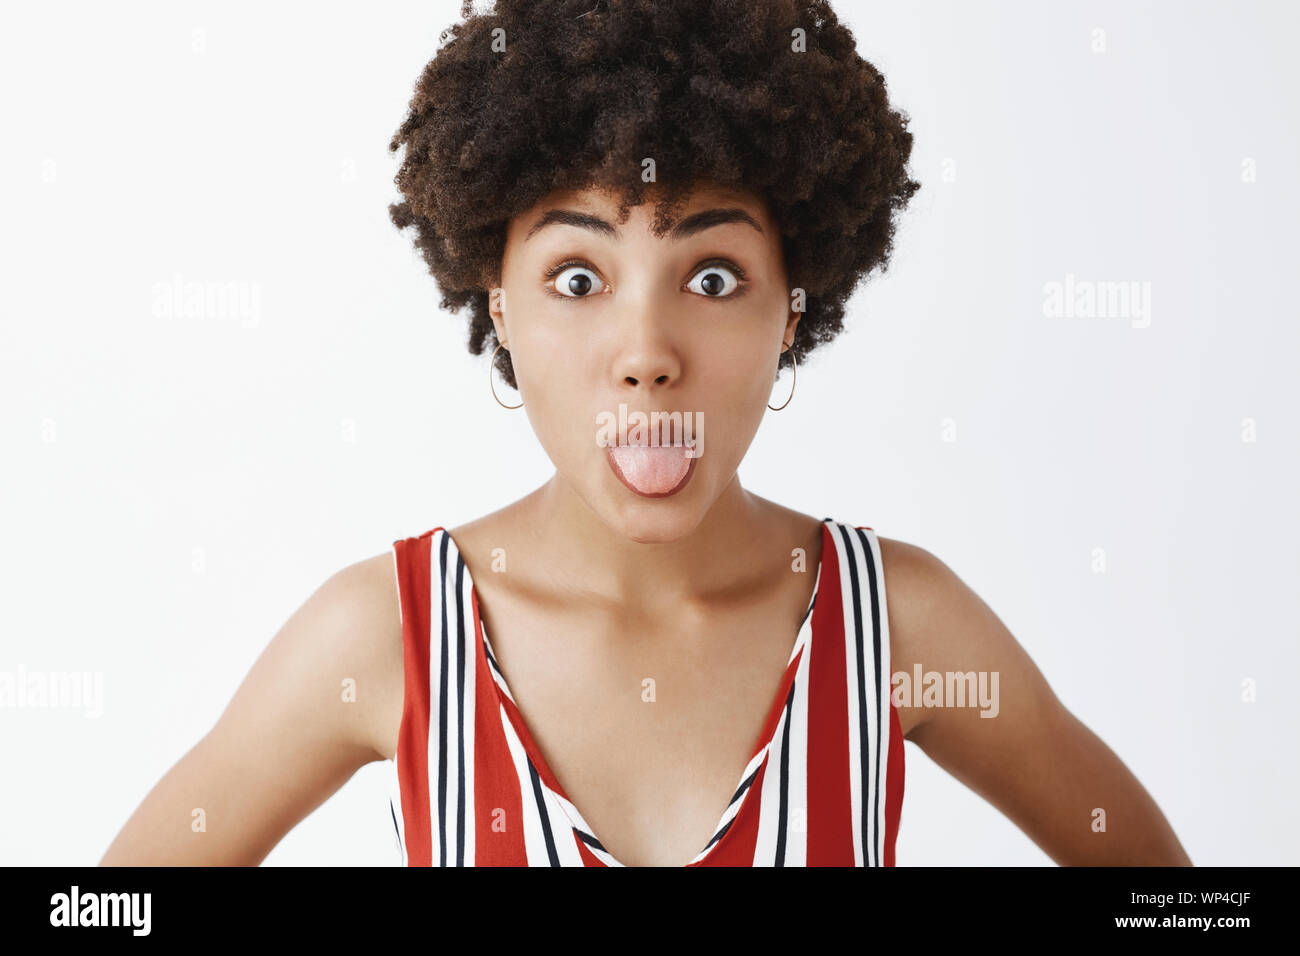 Close-up shot of funny and playful immature stylish woman sticking out tongue and popping eyes at camera fooling around and showing temper while stand Stock Photo